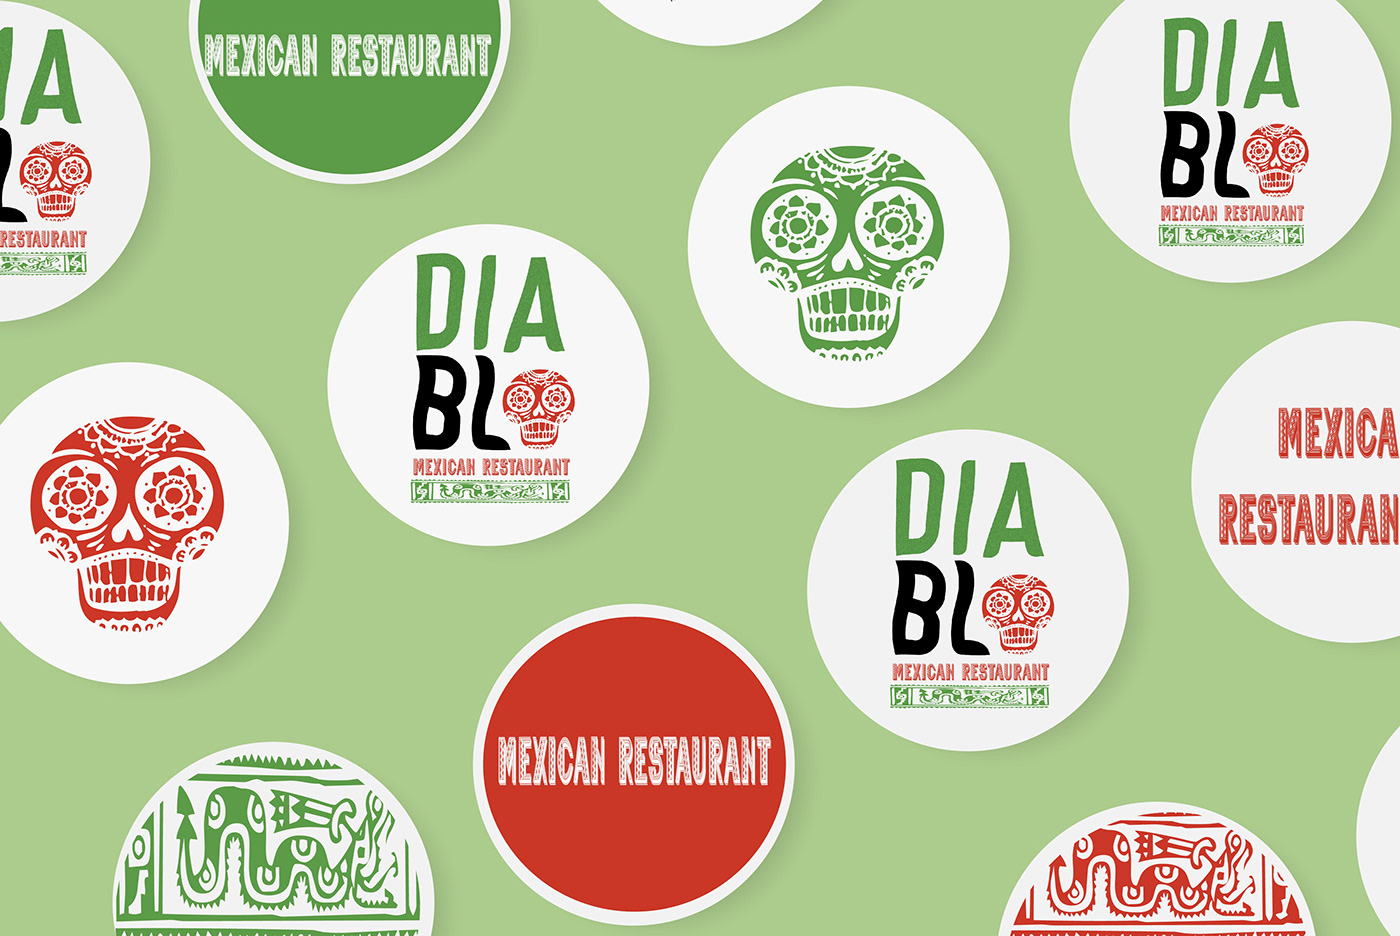 Logo Design Character Mexican Mexican Food restaurant brand identity graphic design  logo identity Social media post